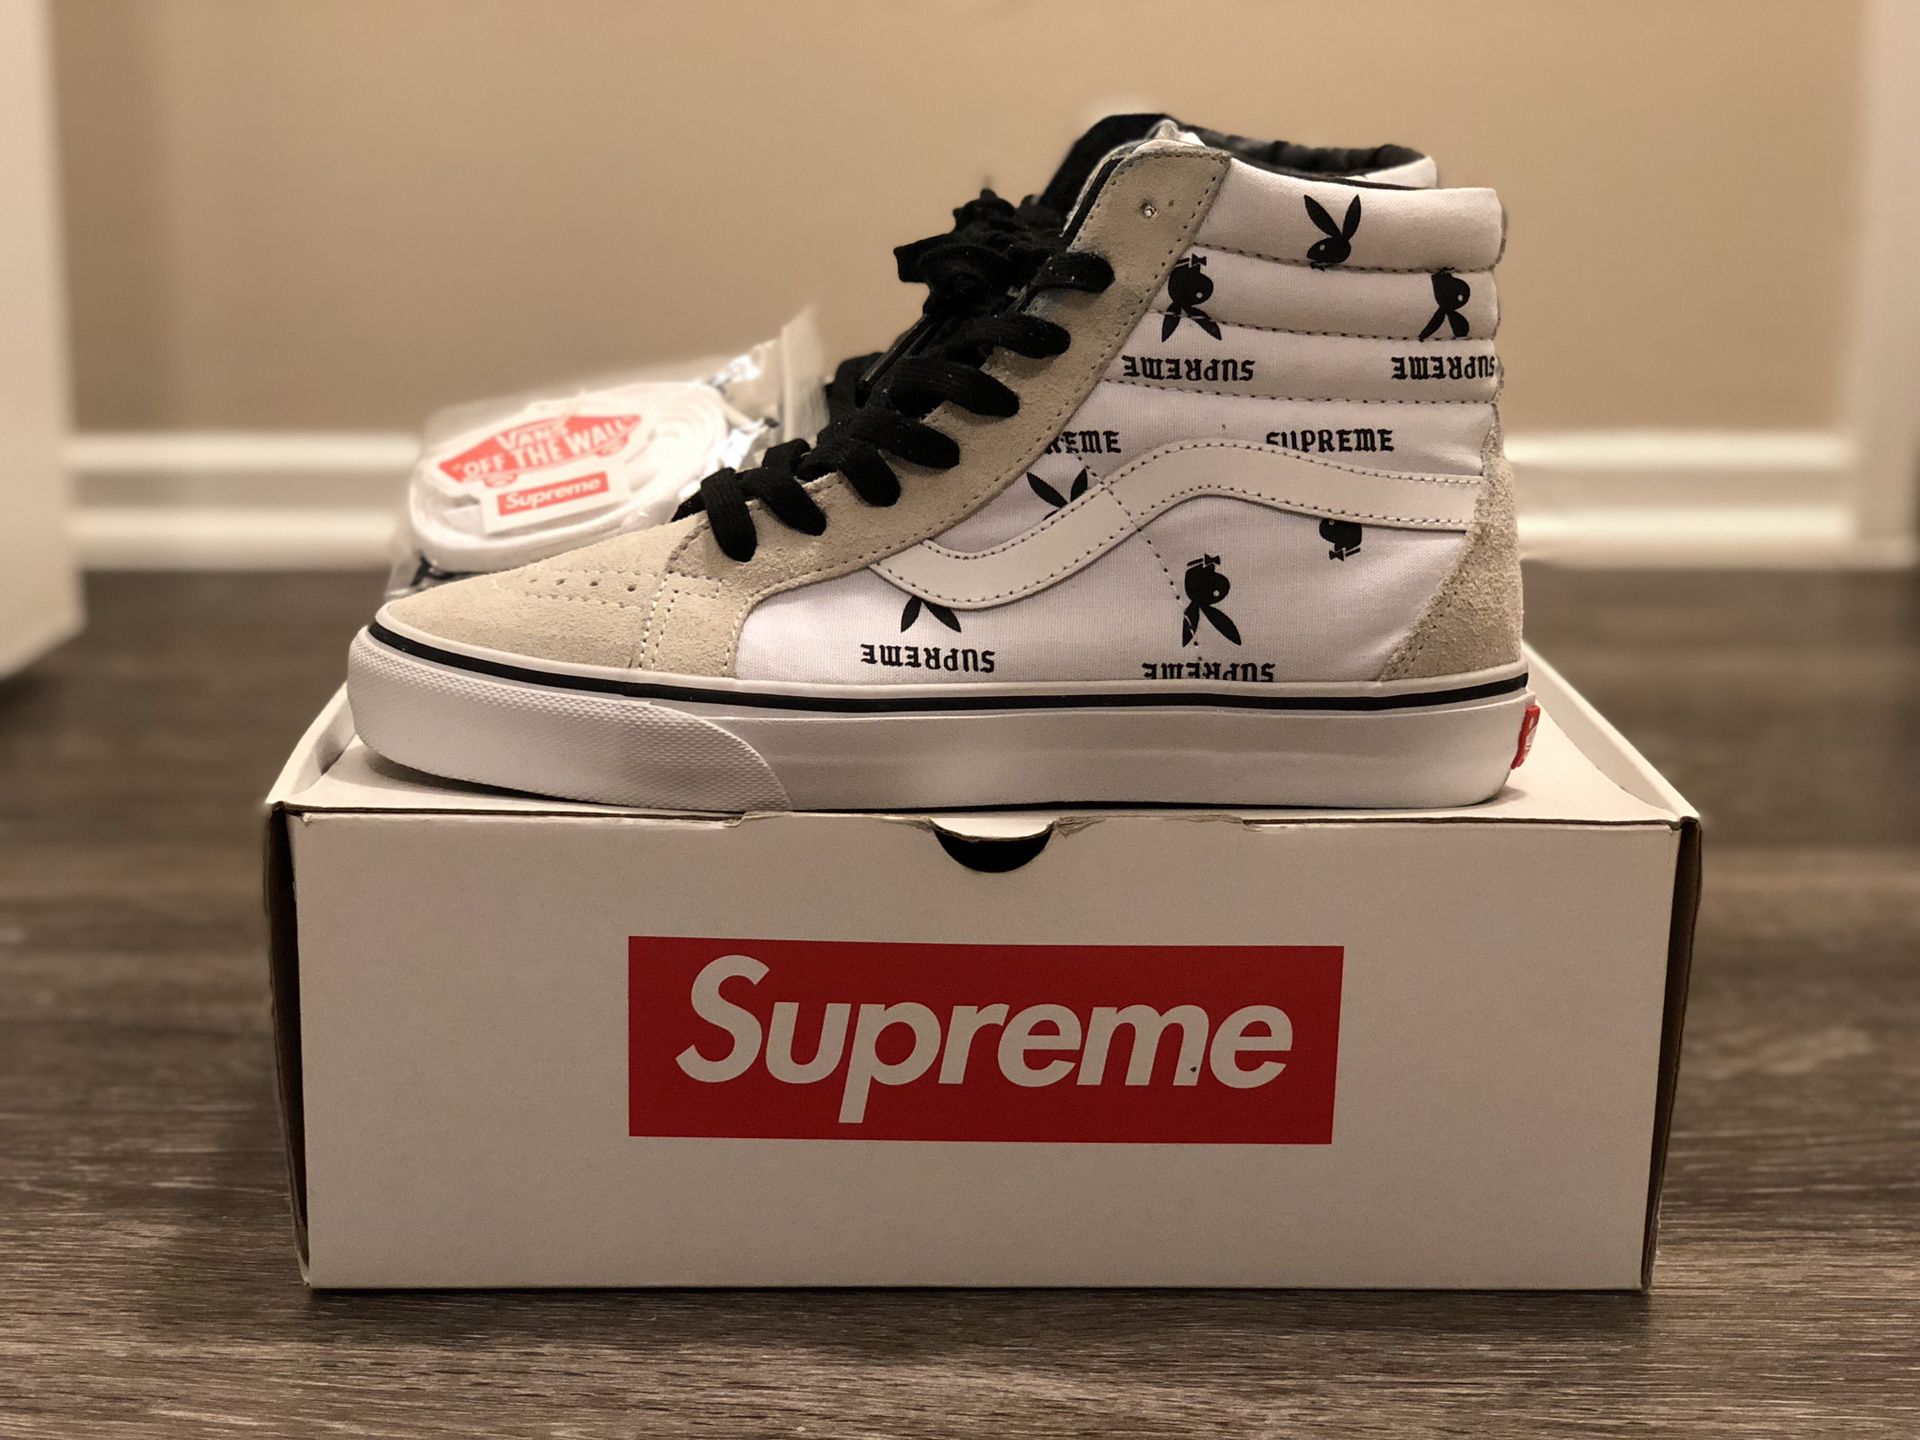 Supreme X playboy Vans for Sale in Long Beach, CA - OfferUp